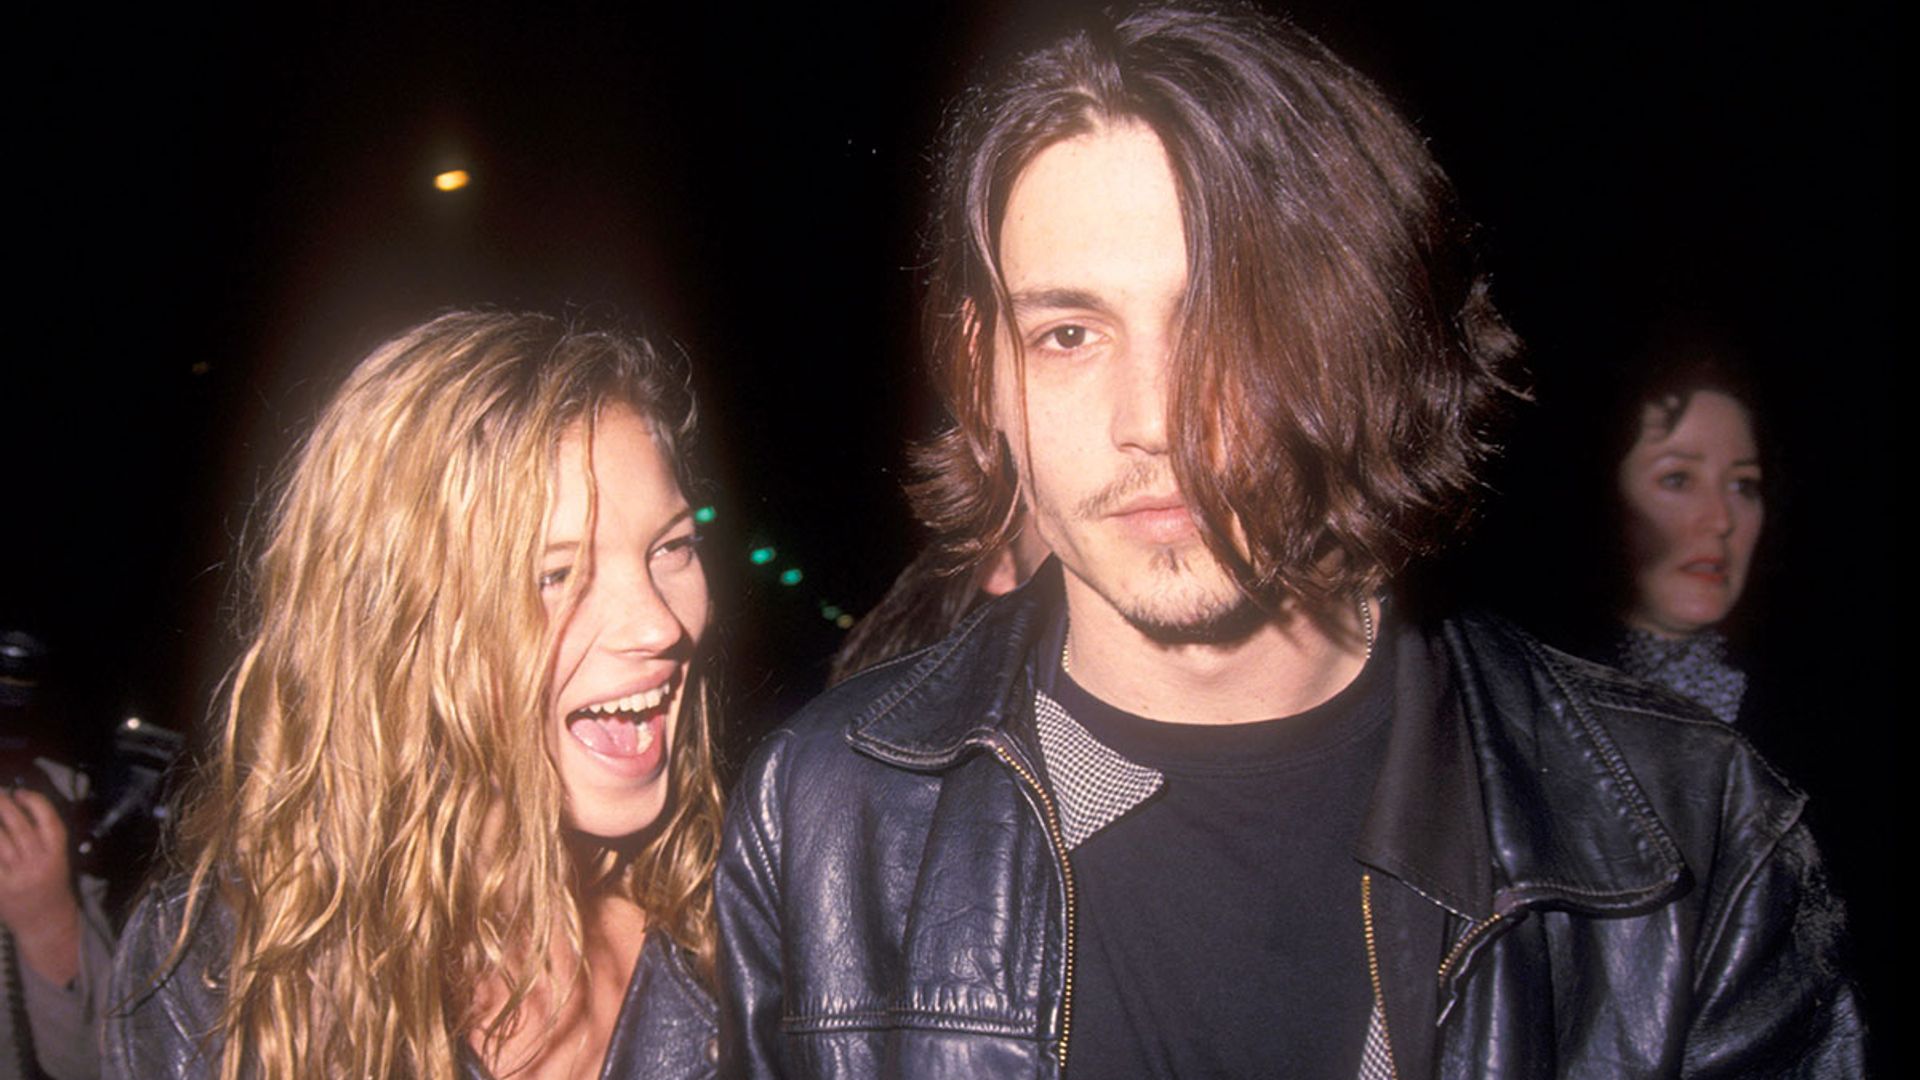 Johnny Depp and Kate Moss: Inside their relationship - then and now - ahead of trial appearance